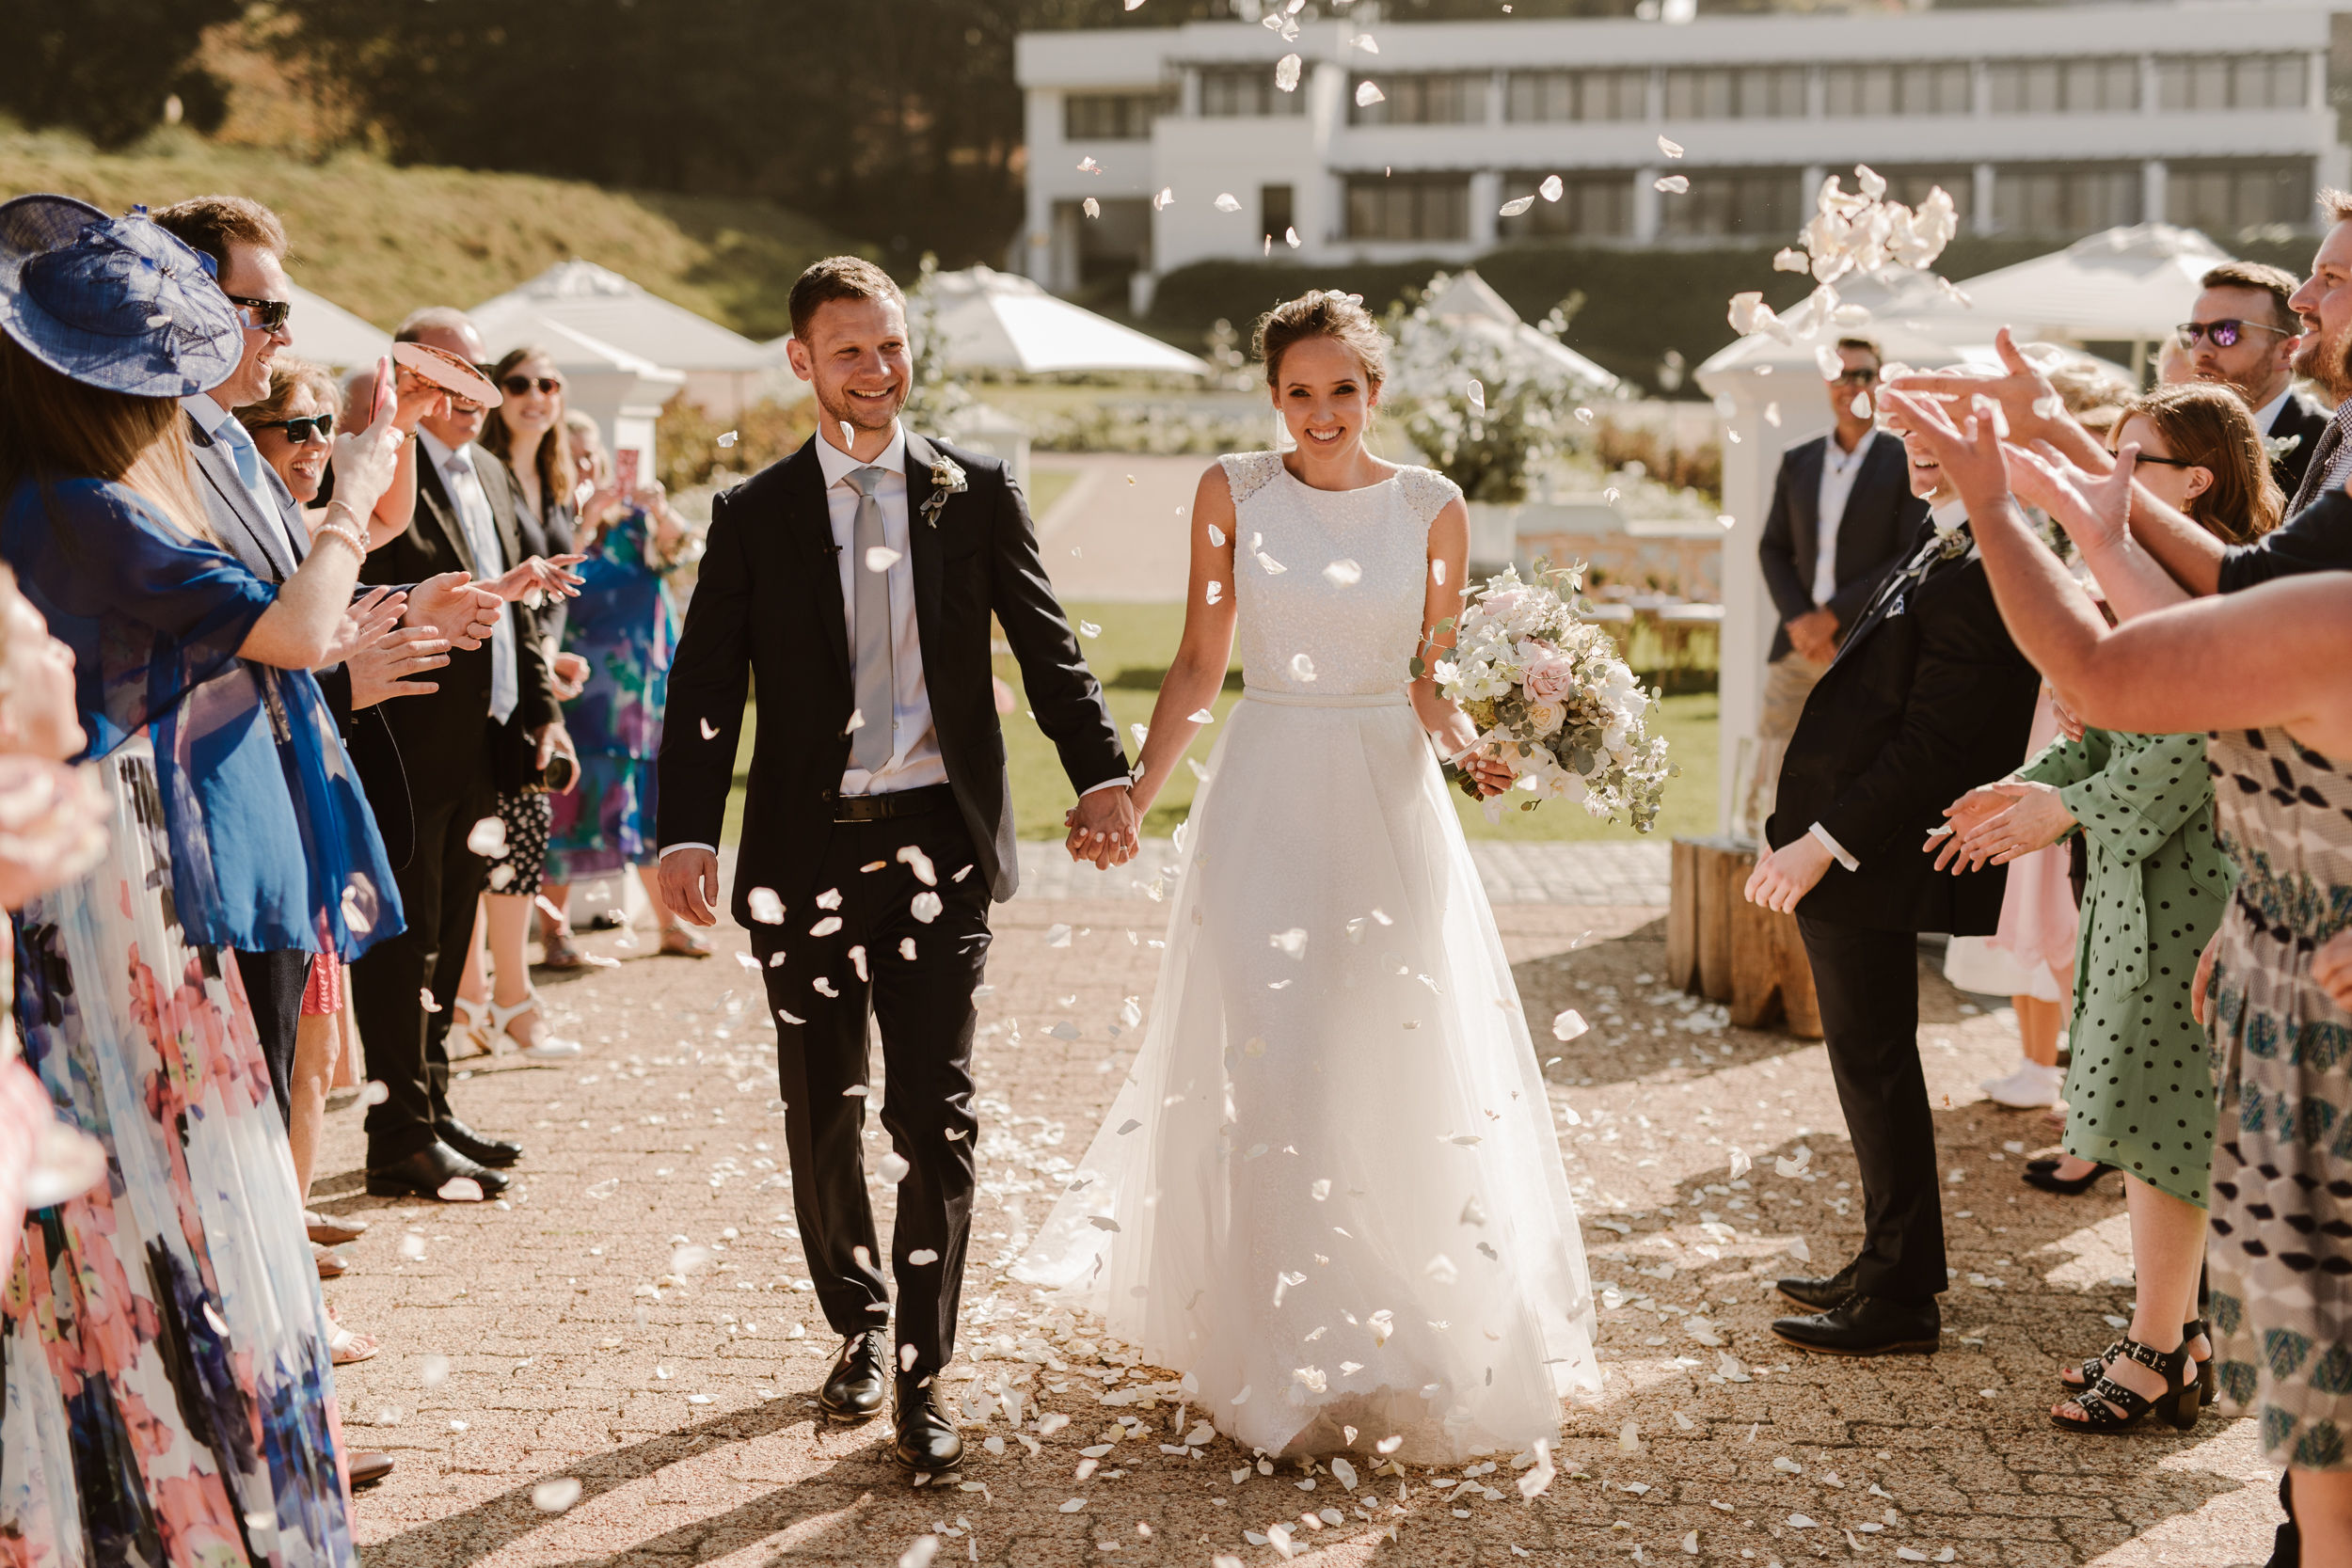 The bride and groom greet the crowd, who throws white rose petals over them after their socially conscious wedding in Cape Town, South Africa.